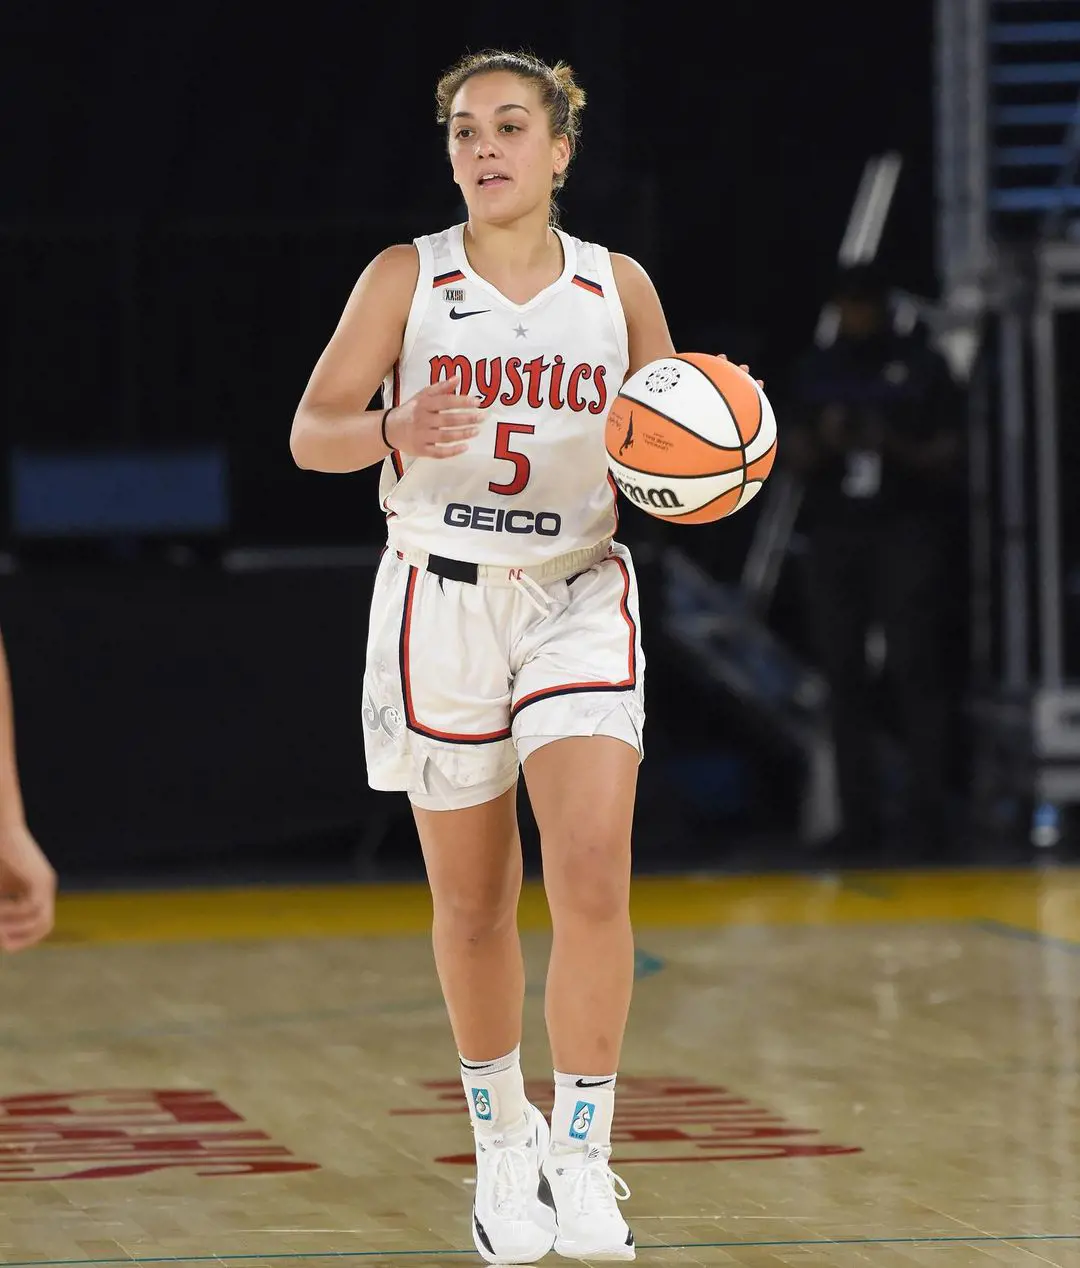 Mystics Point Guard Mitchell has been the smallest active player in WNBA for more than a decade.